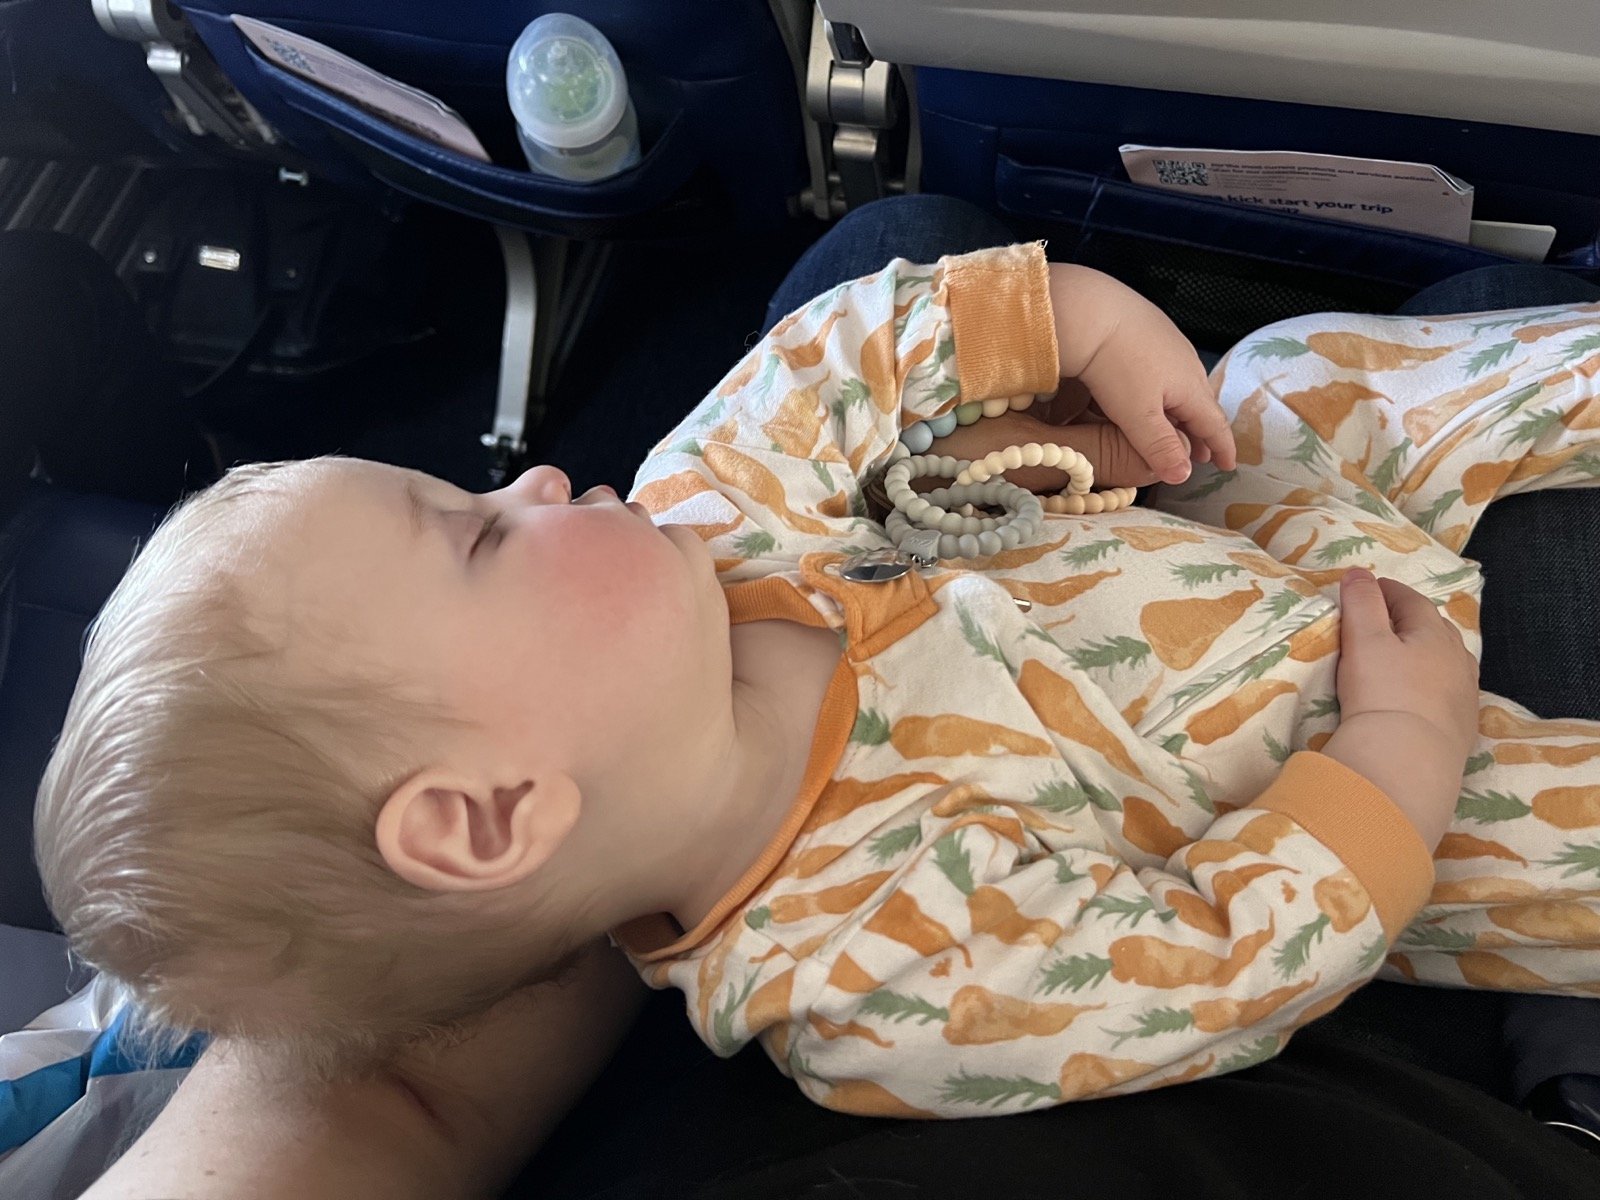 how young can you fly with babies, tips for flying with infant twins babies, lments of style airplane baby tips, easiest for baby to wear on a plane